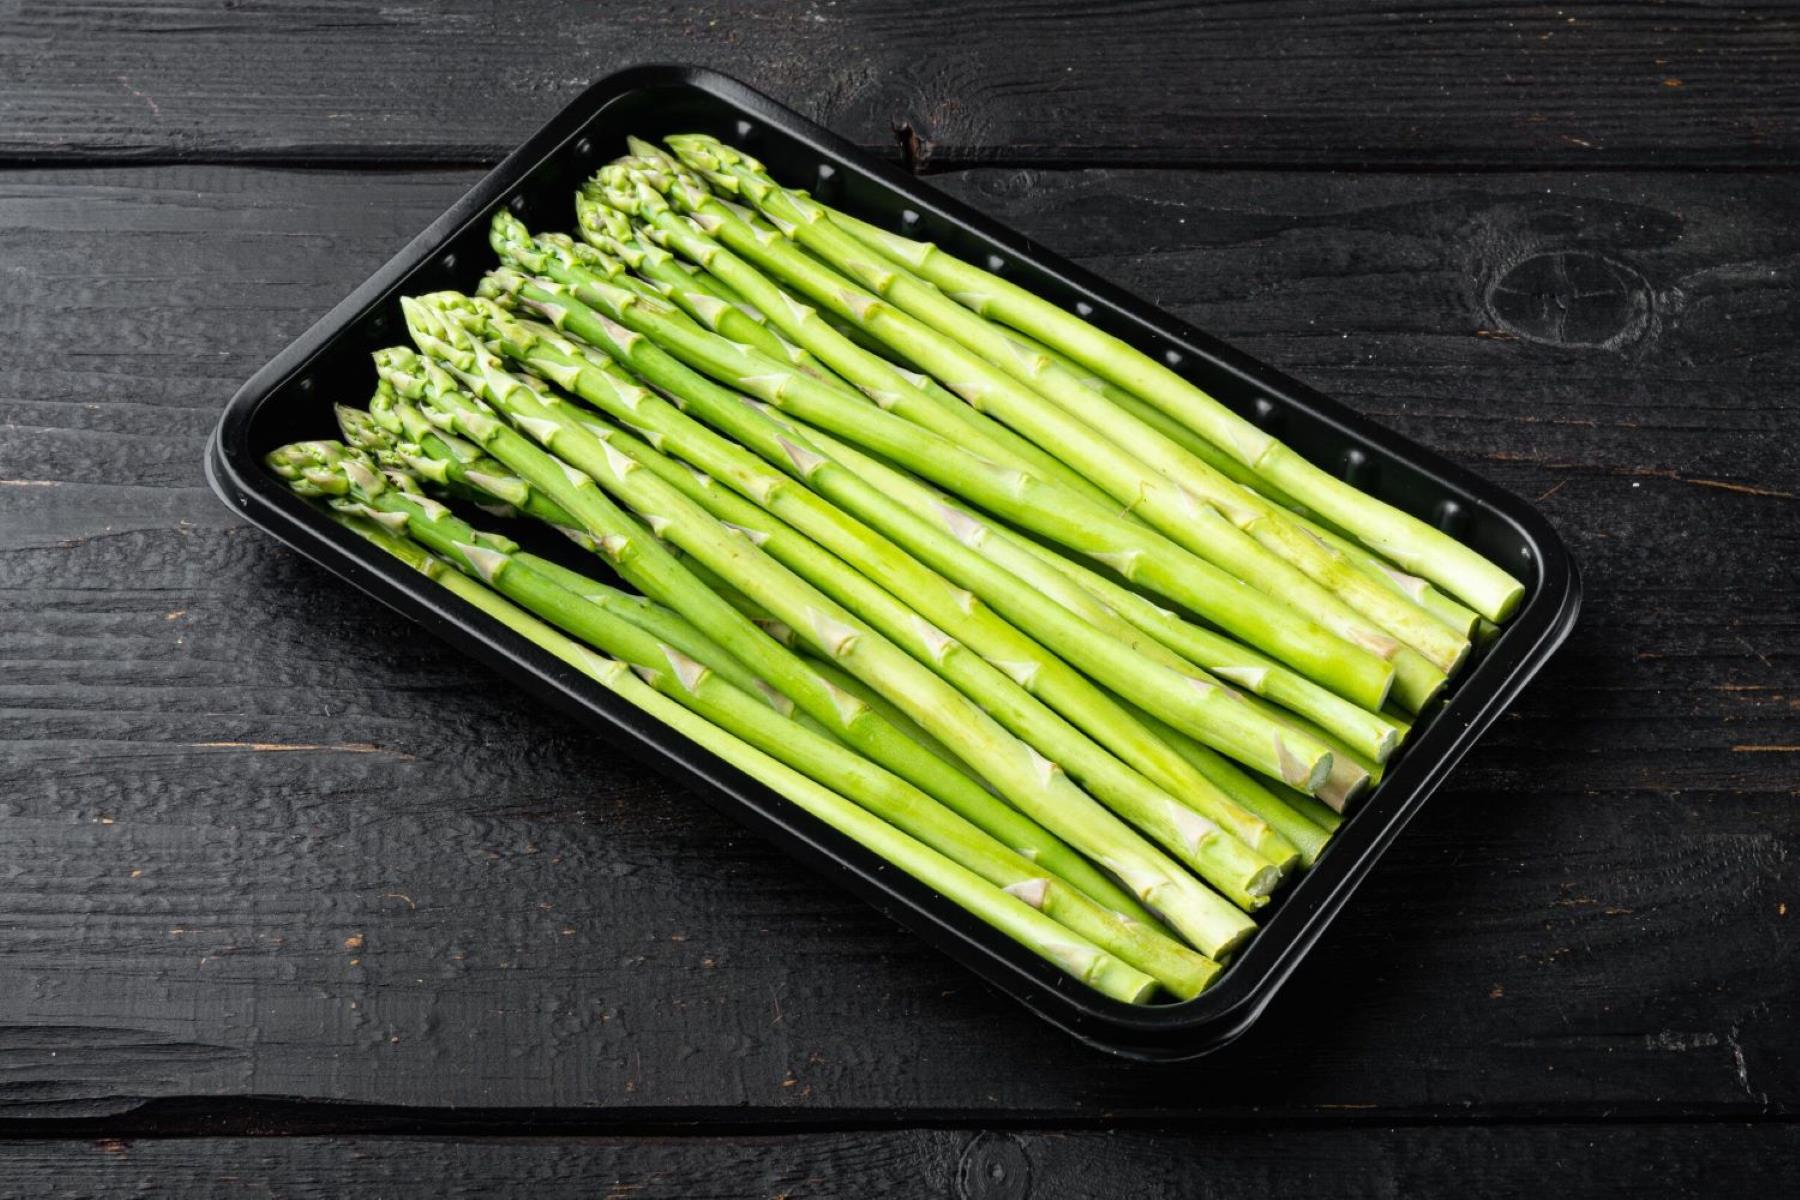 Delicious Stovetop Recipe: Cooking Canned Asparagus Made Easy!